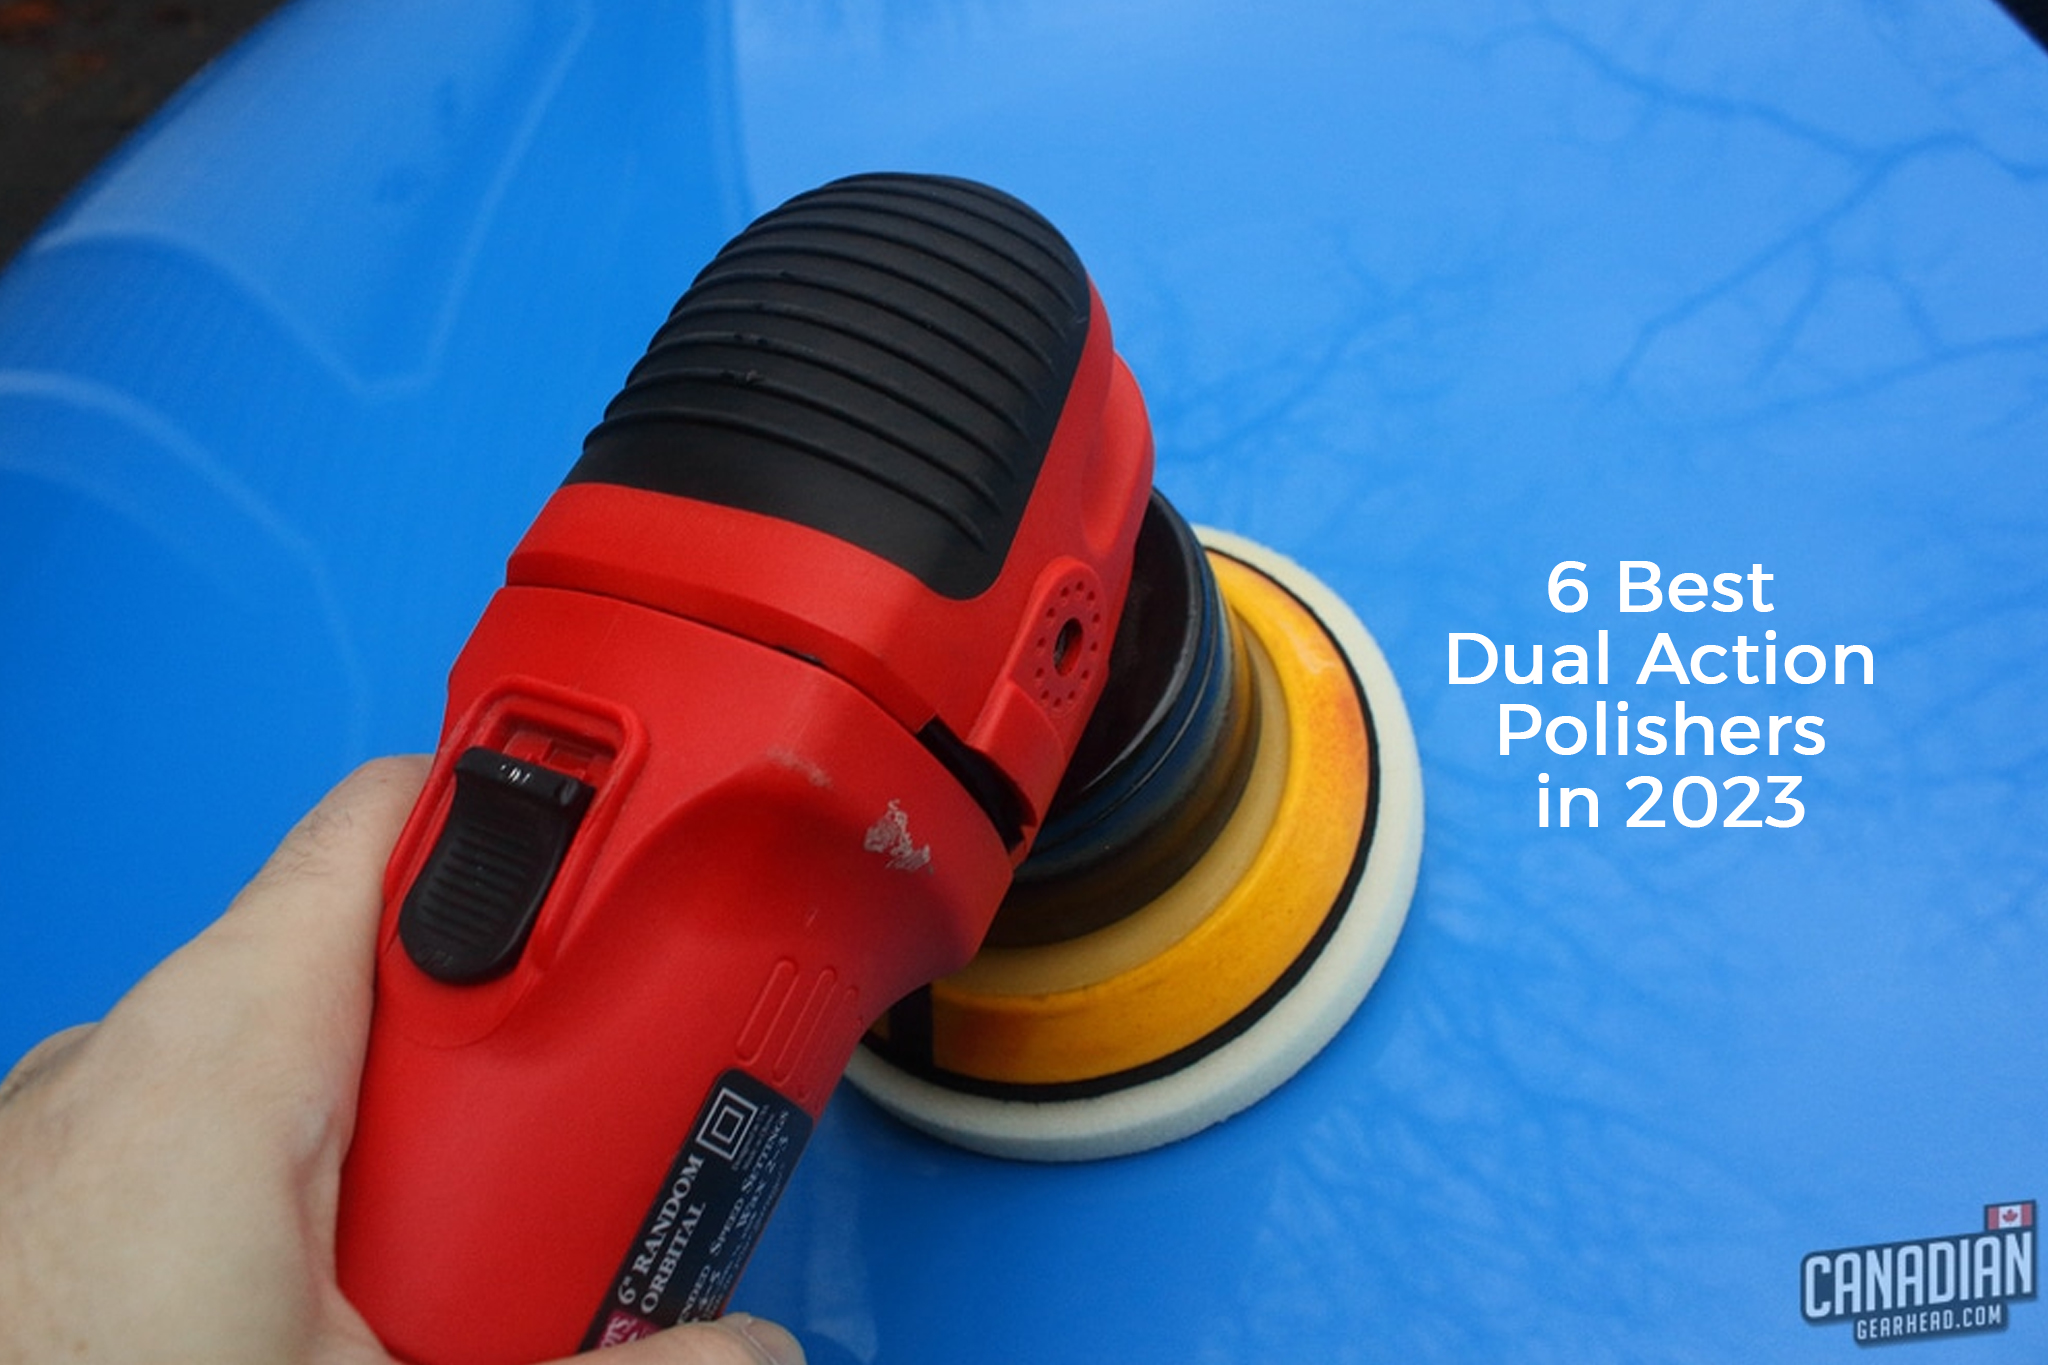 6 Best Dual Action Polishers in 2023